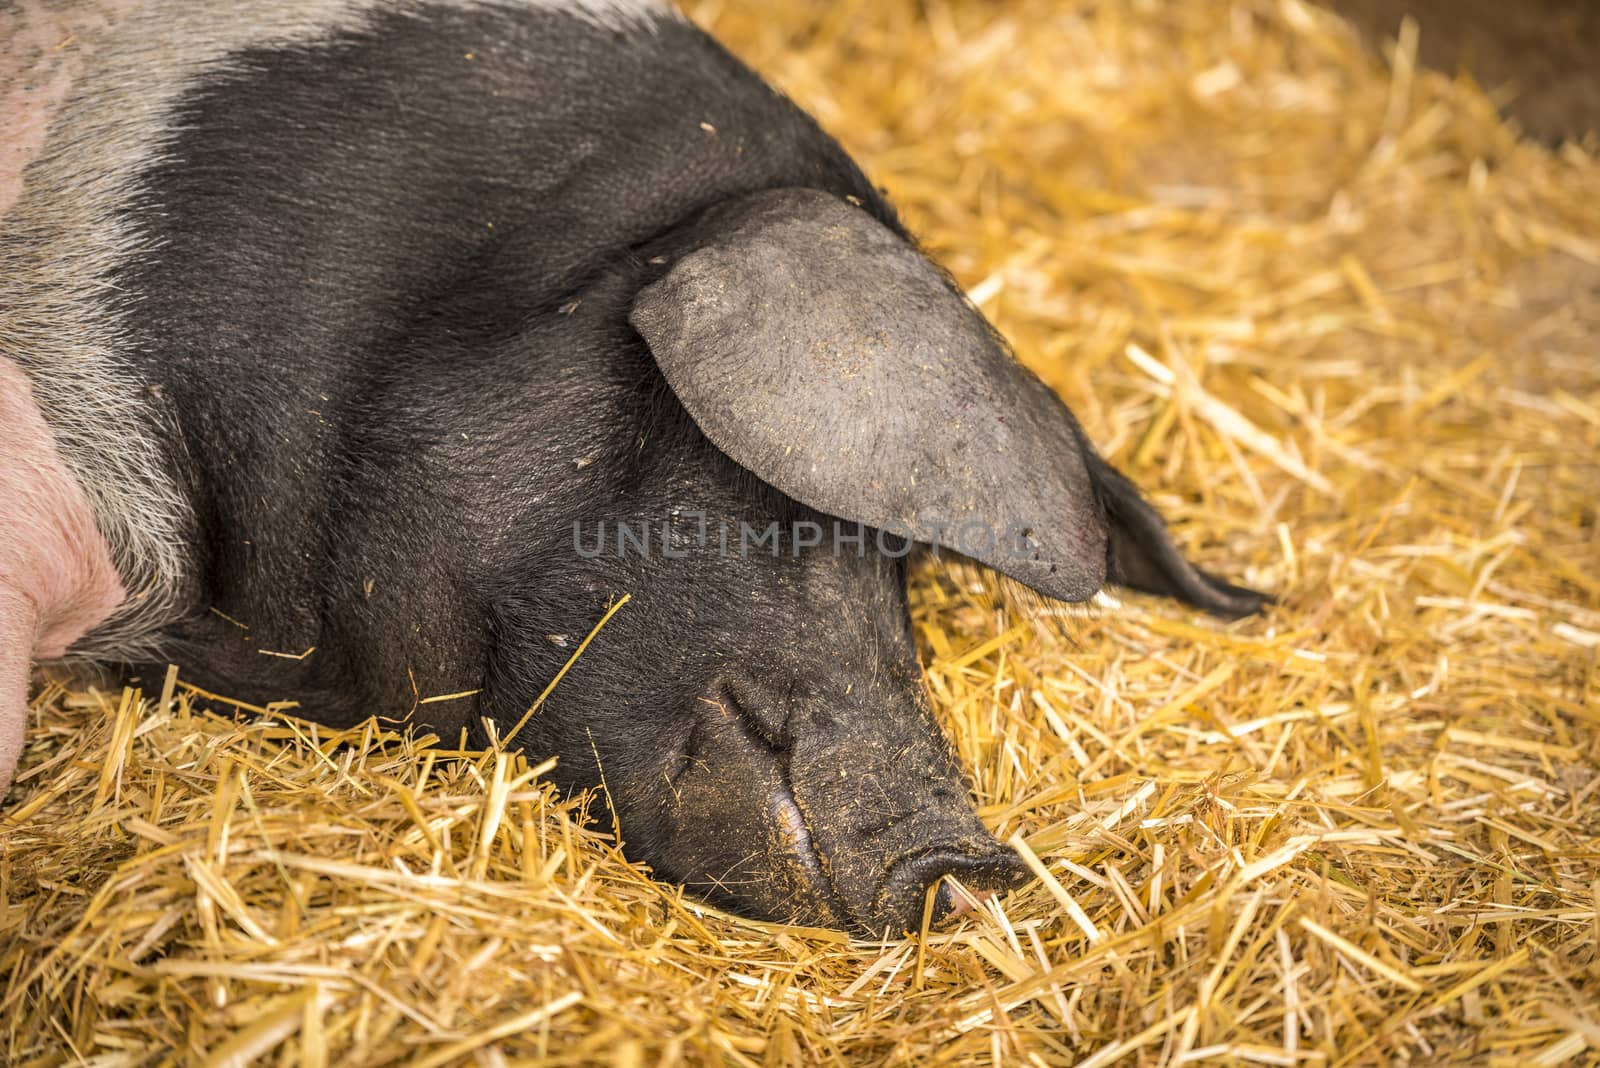 Close-up image with the head of a Swabian-Hall swine, a german breed of pigs, resting on a bed of hay.